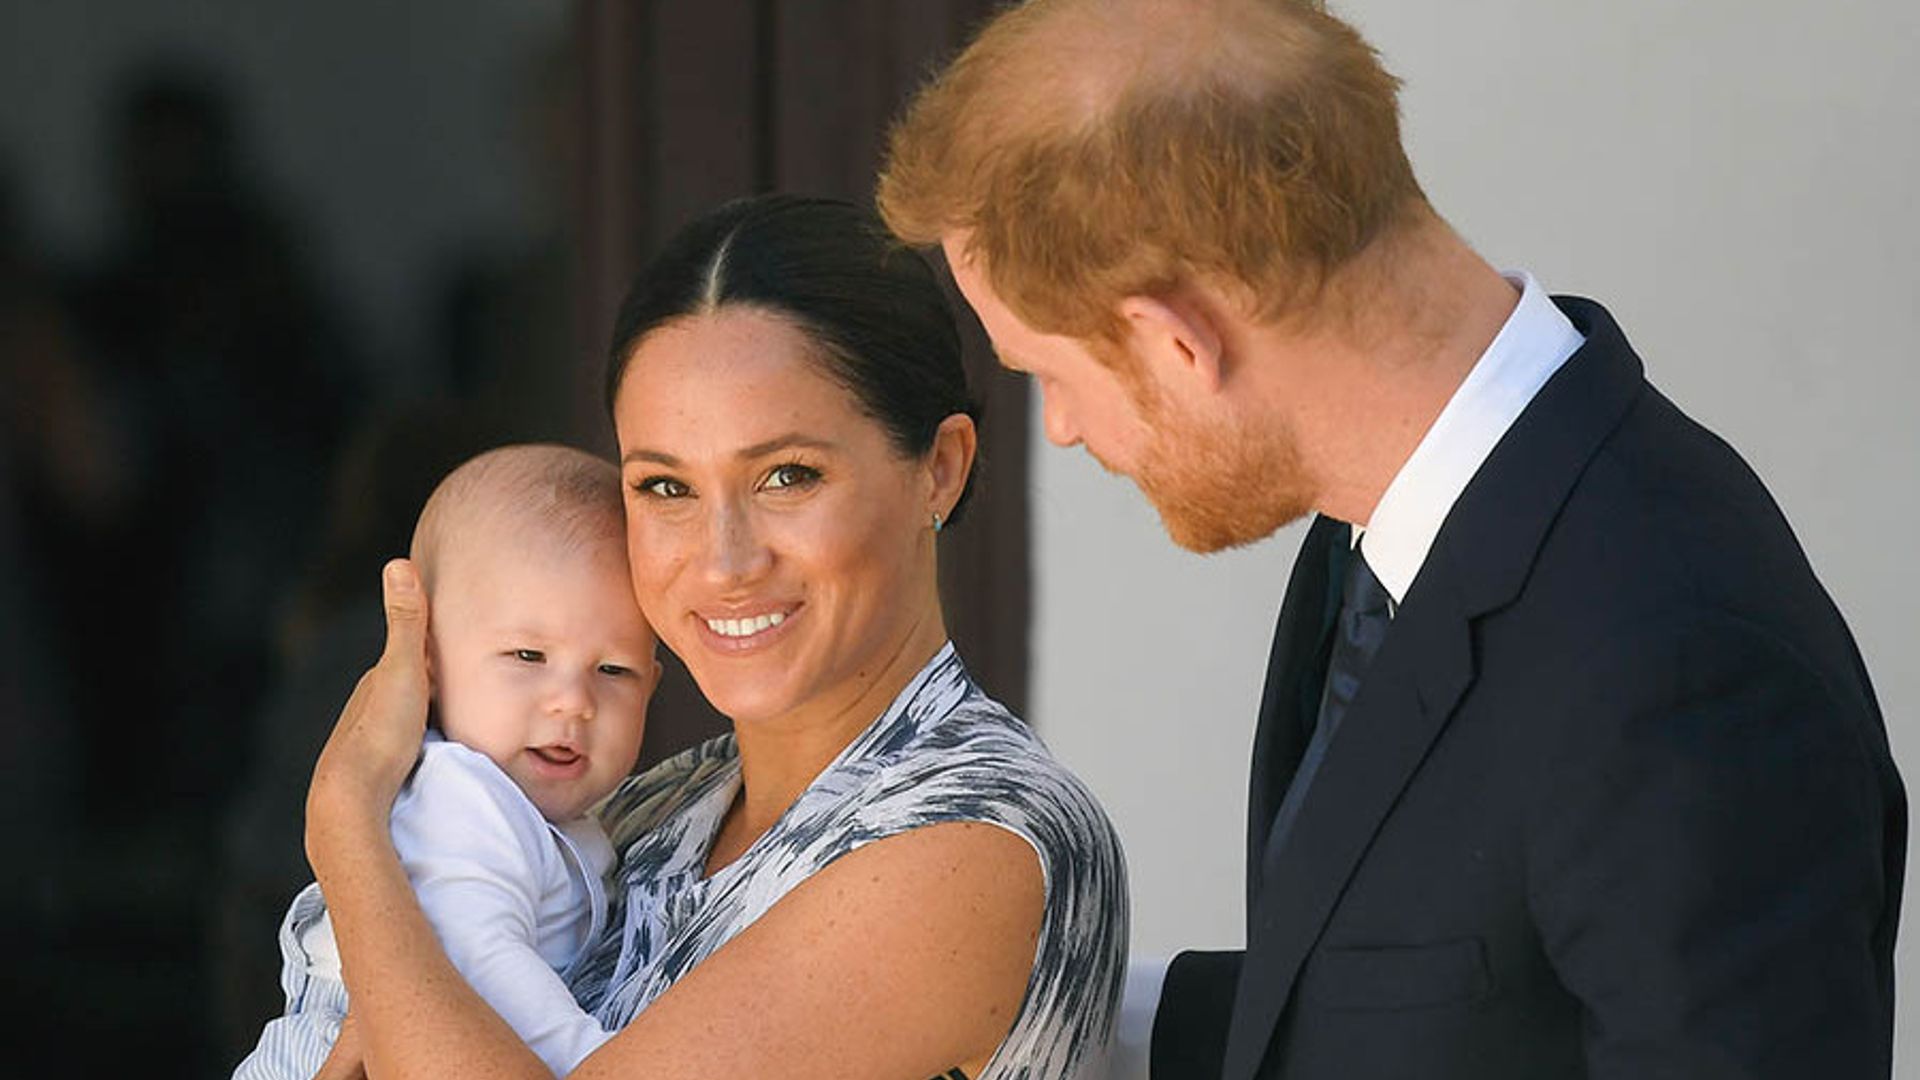 'Everything really does change': Prince Harry opens up about how fatherhood is connected to his environmentalism